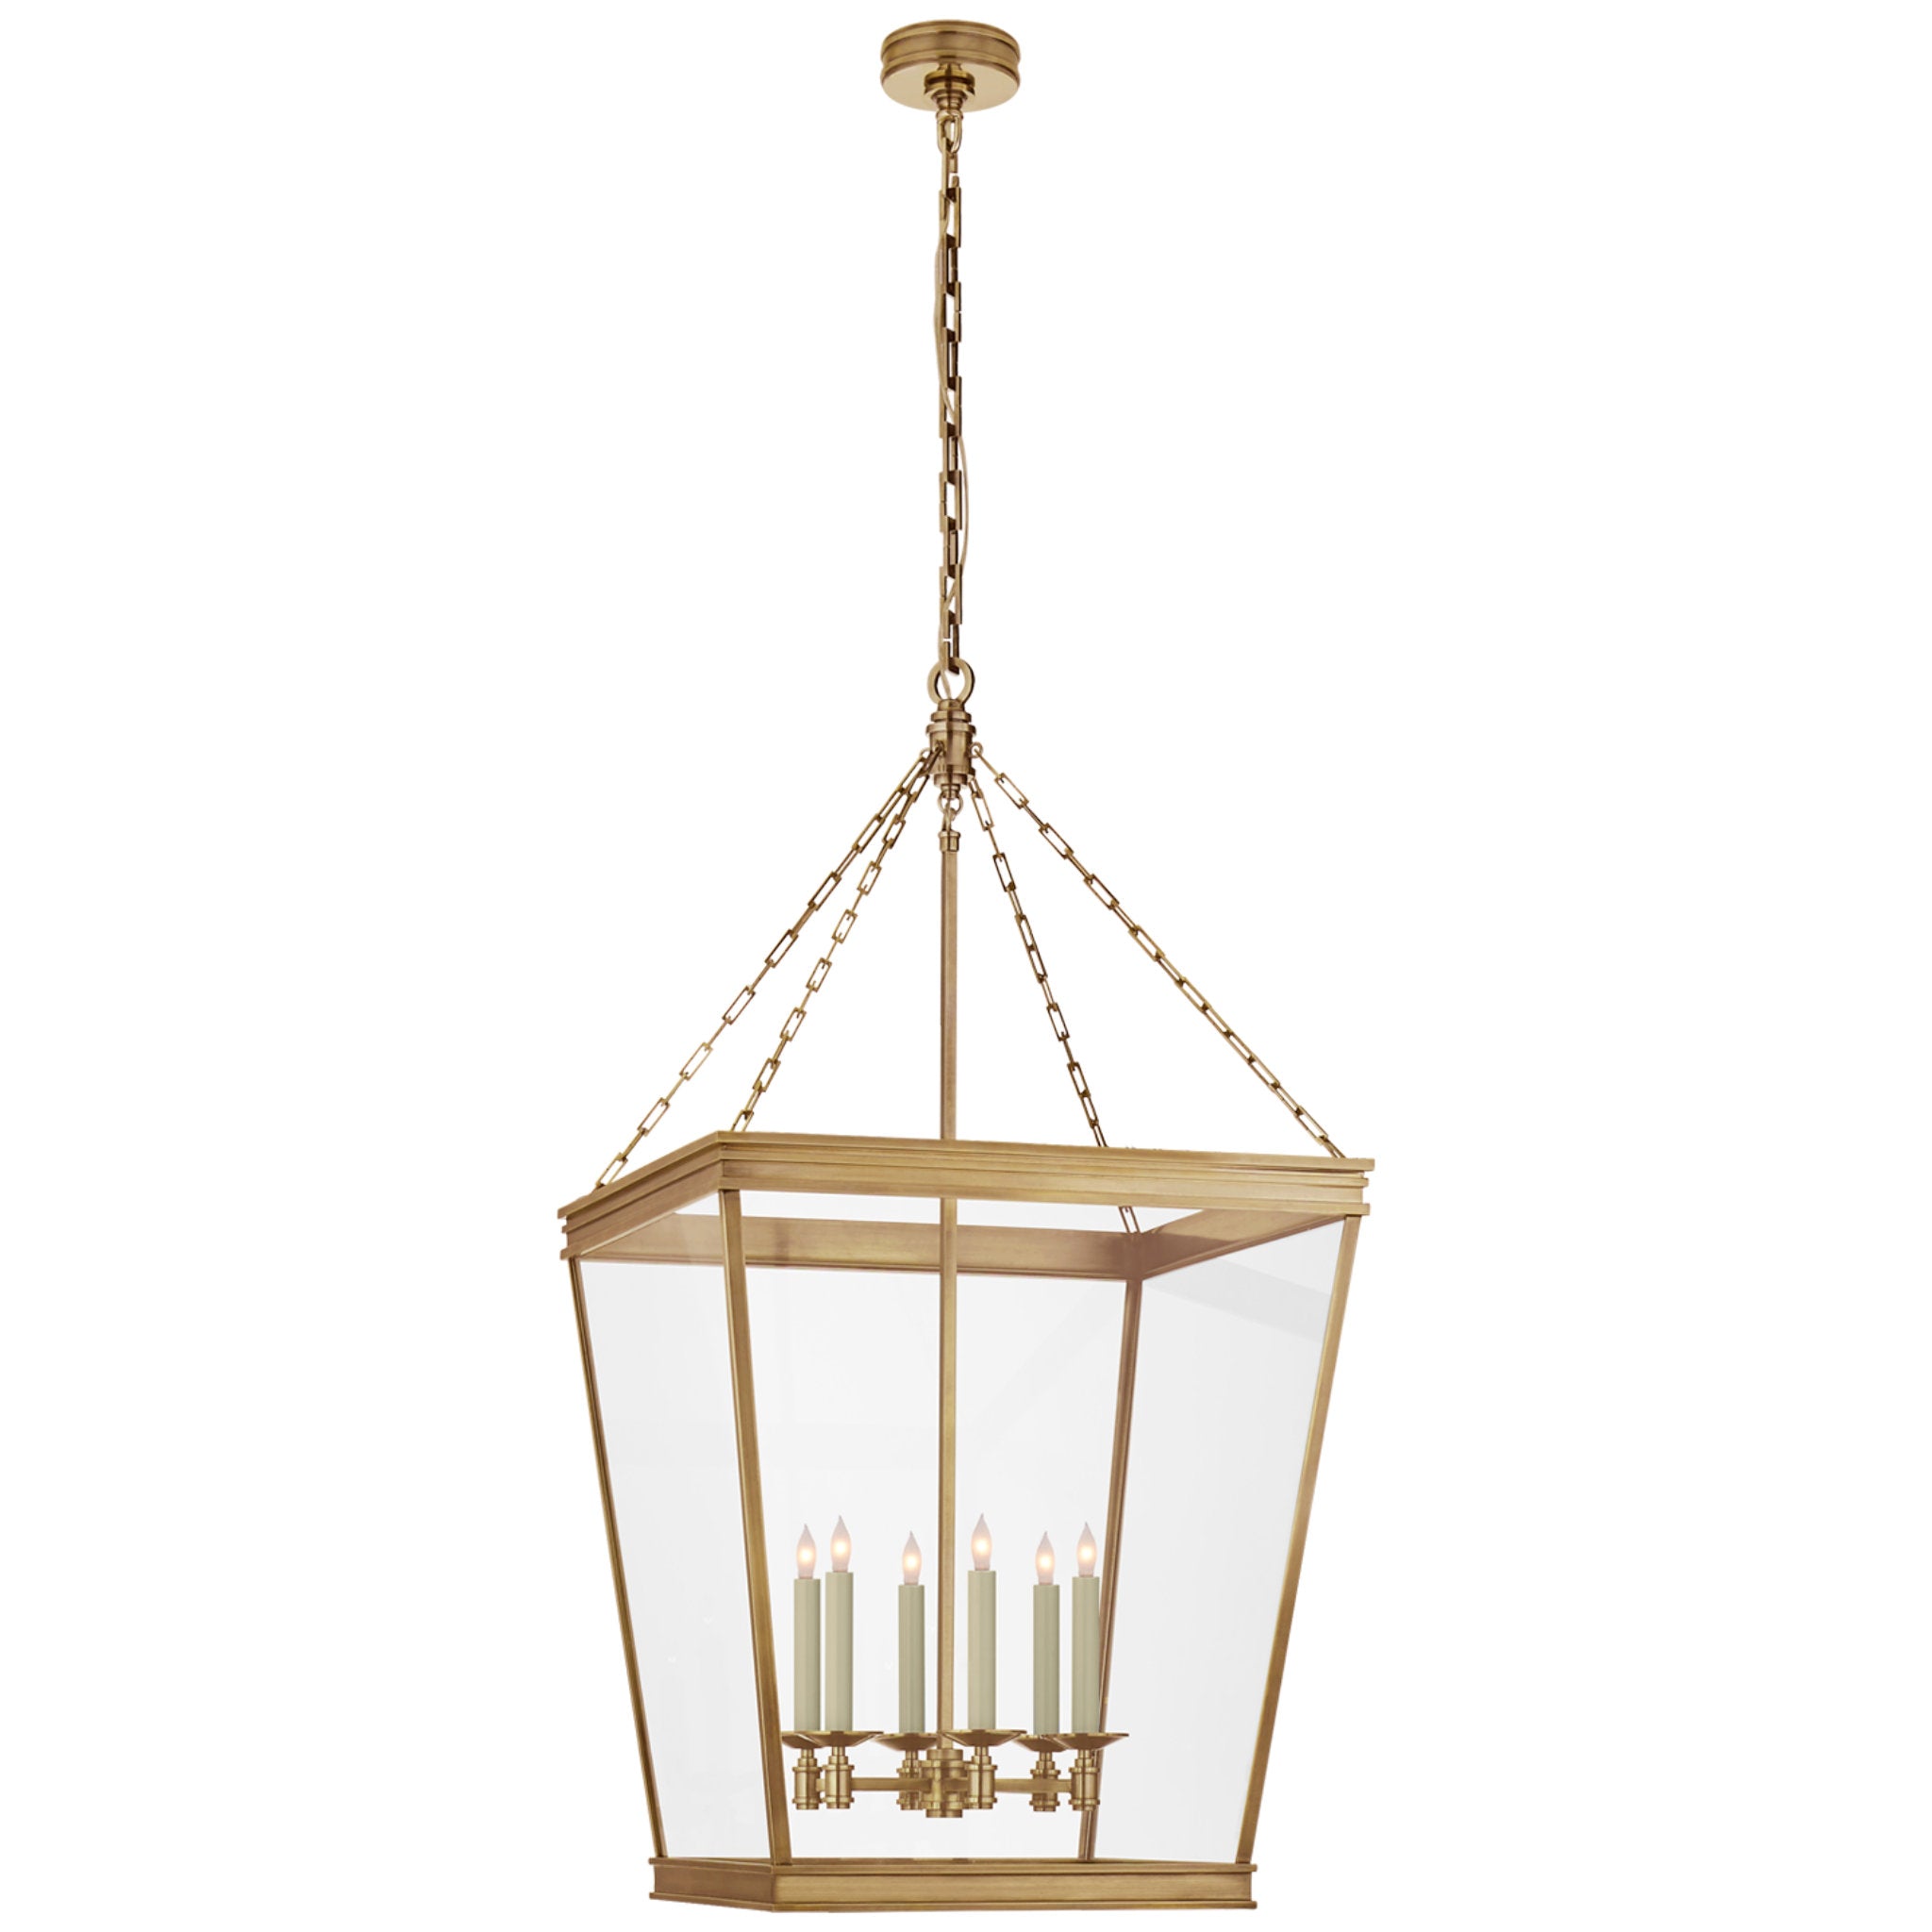 Chapman & Myers Launceton Large Square Lantern in Antique-Burnished Brass with Clear Glass